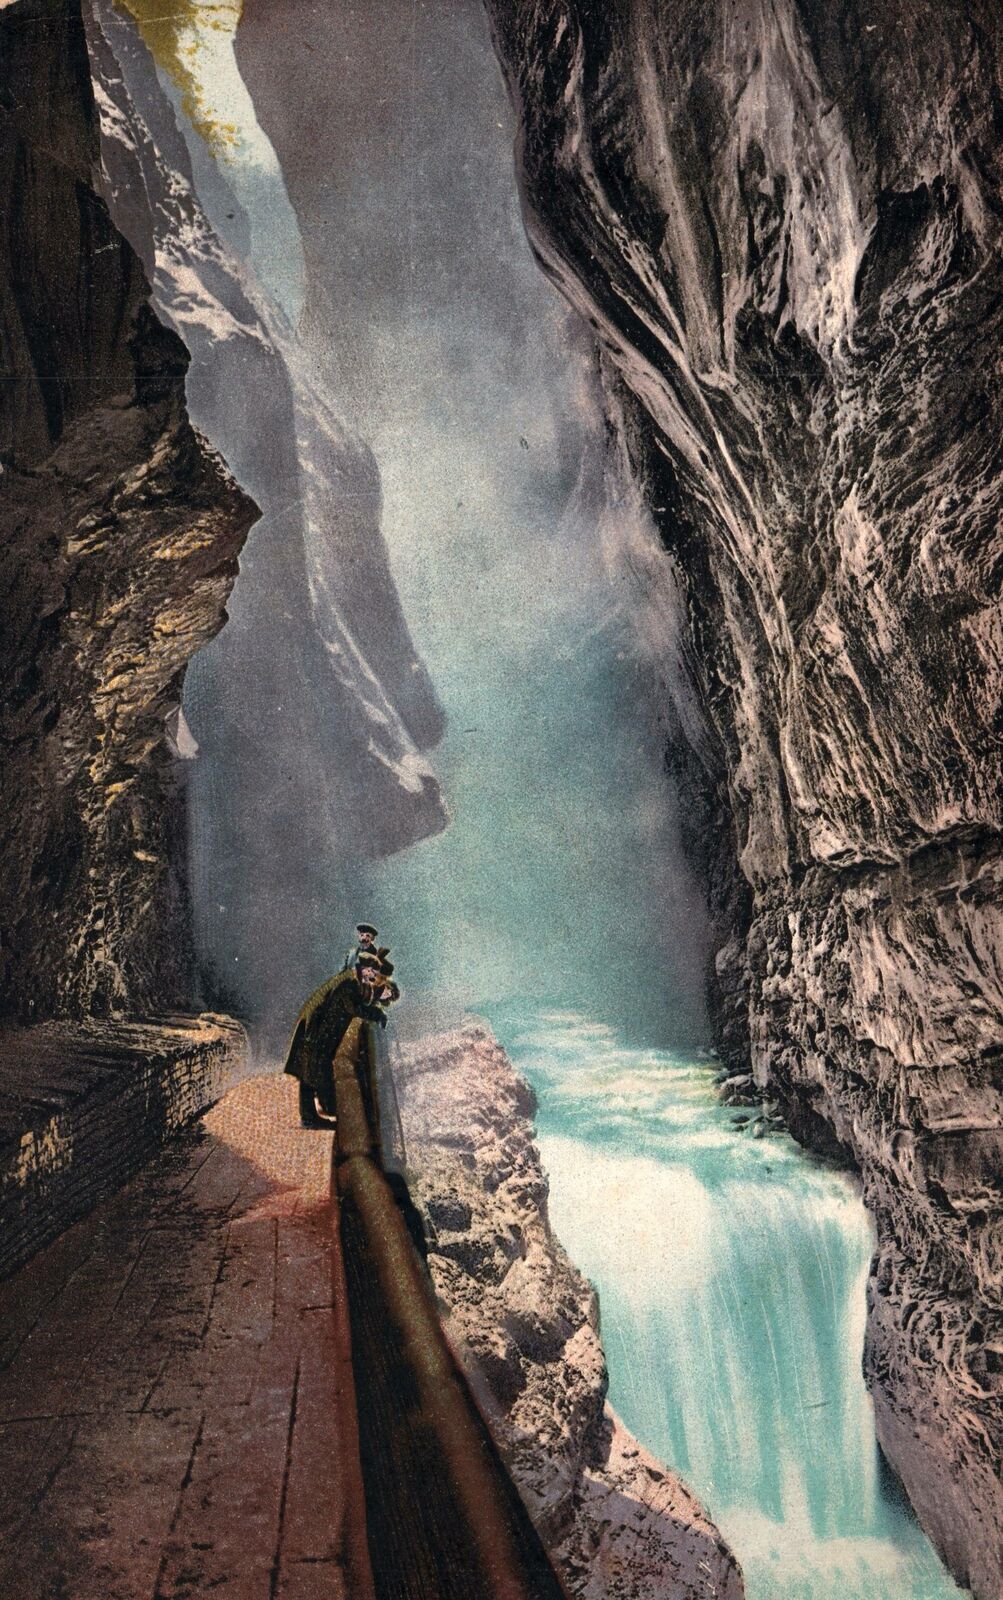 VINTAGE POSTCARD END OF THE TAMINA GORGE WITH THE HOT SPRINGS SWITEZERLAND 1910s